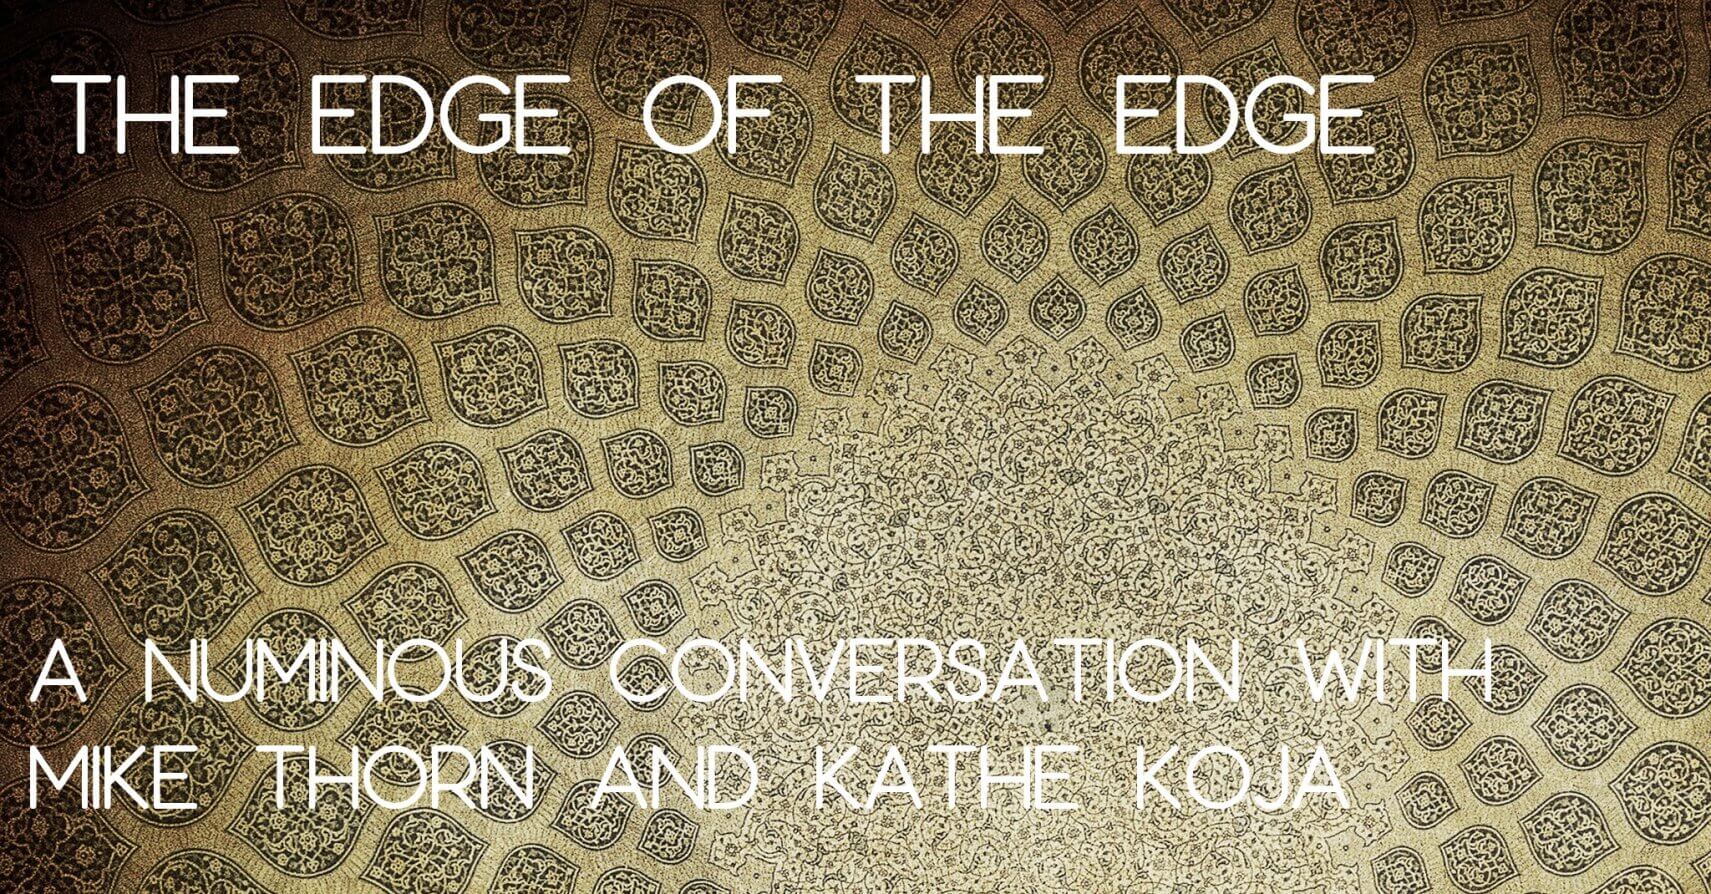 THE EDGE OF THE EDGE: A Numinous Conversation with Mike Thorn and Kathe Koja